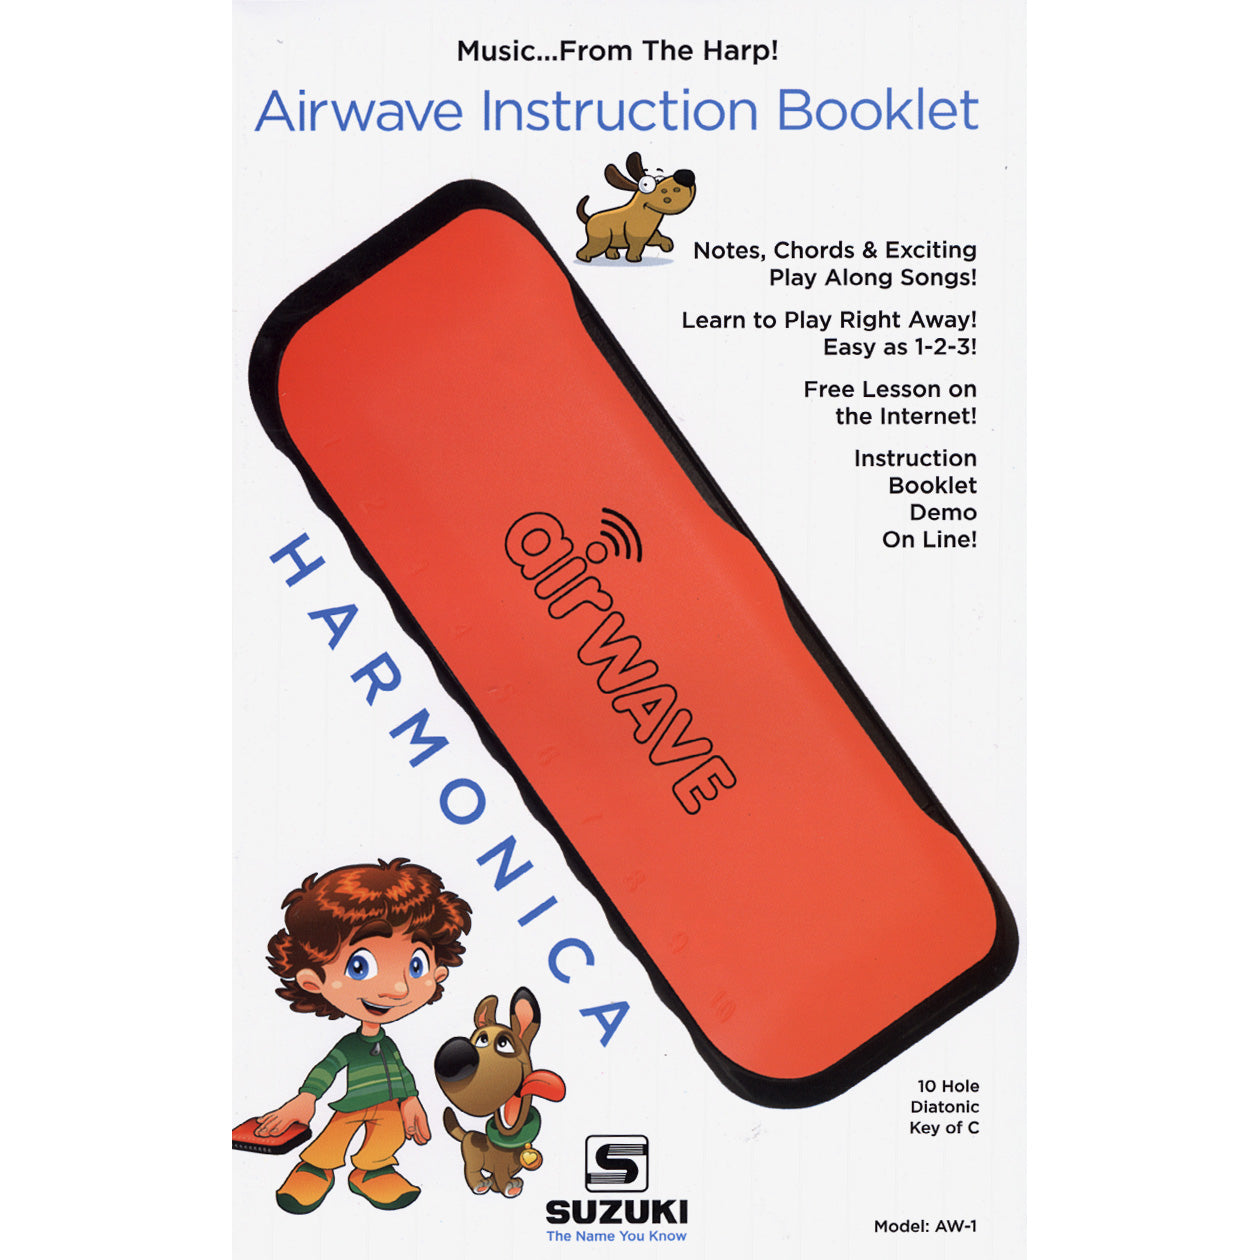 Booklet cove of Suzuki AW-1 Air Wave Harmonica for Kids